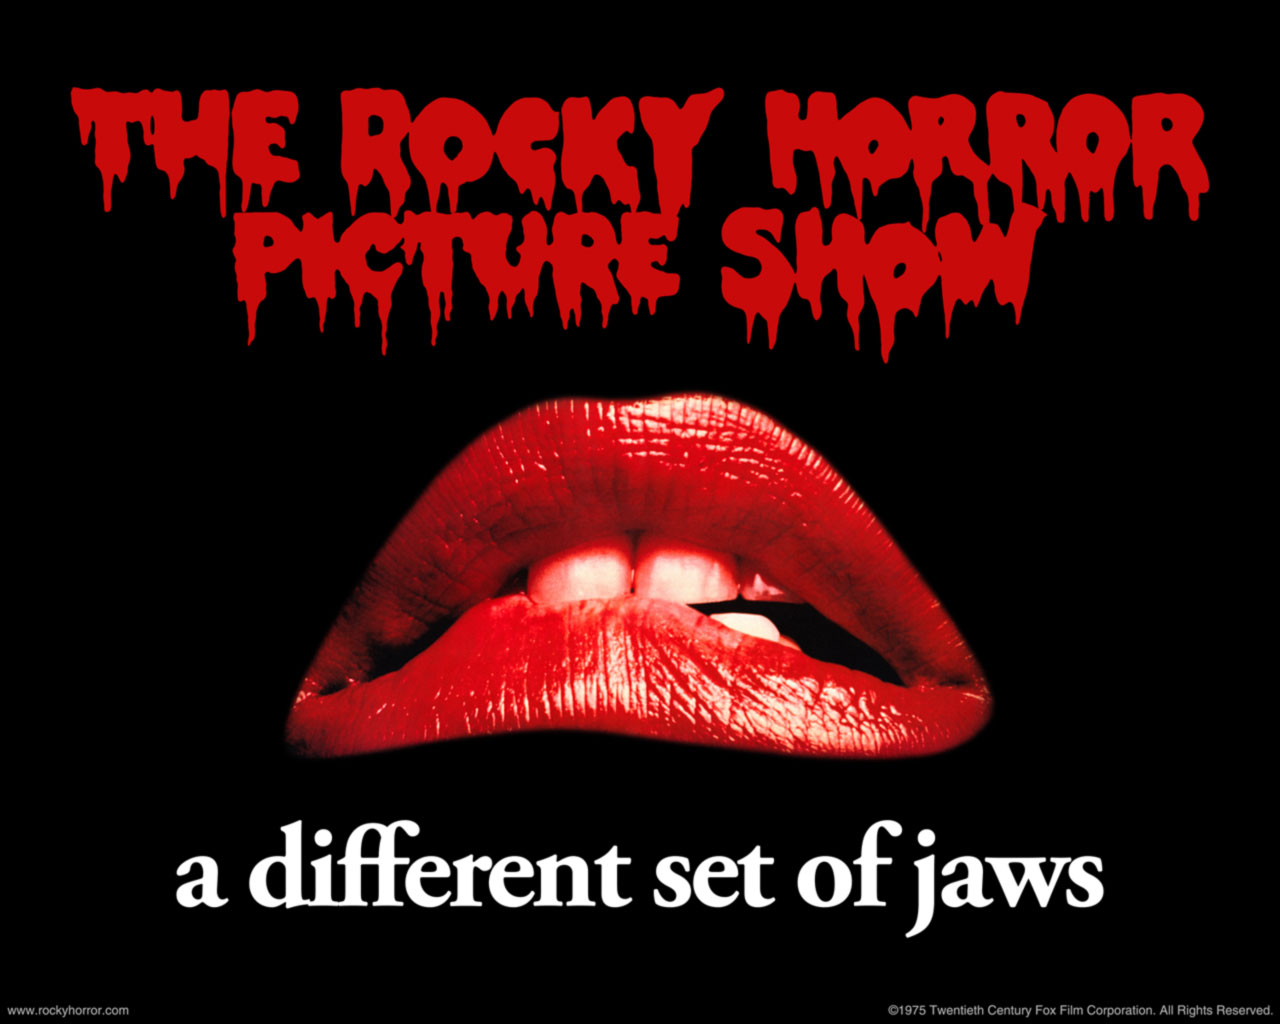 Rocky Horror Picture Show - HD Wallpaper 